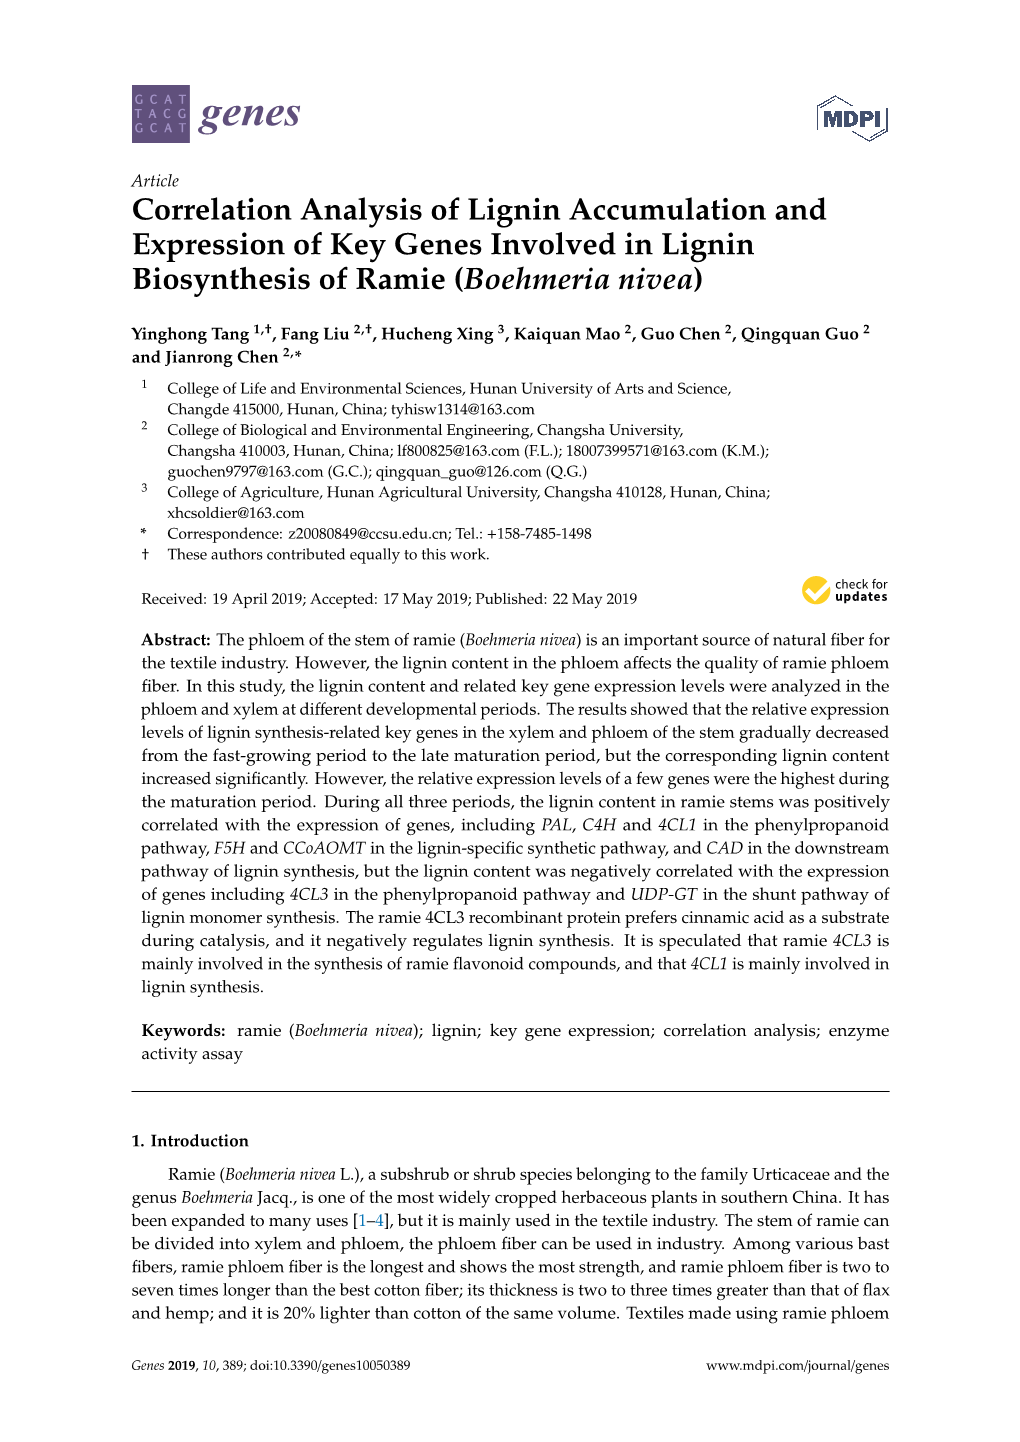 Correlation Analysis of Lignin Accumulation and Expression of Key Genes Involved in Lignin Biosynthesis of Ramie (Boehmeria Nivea)